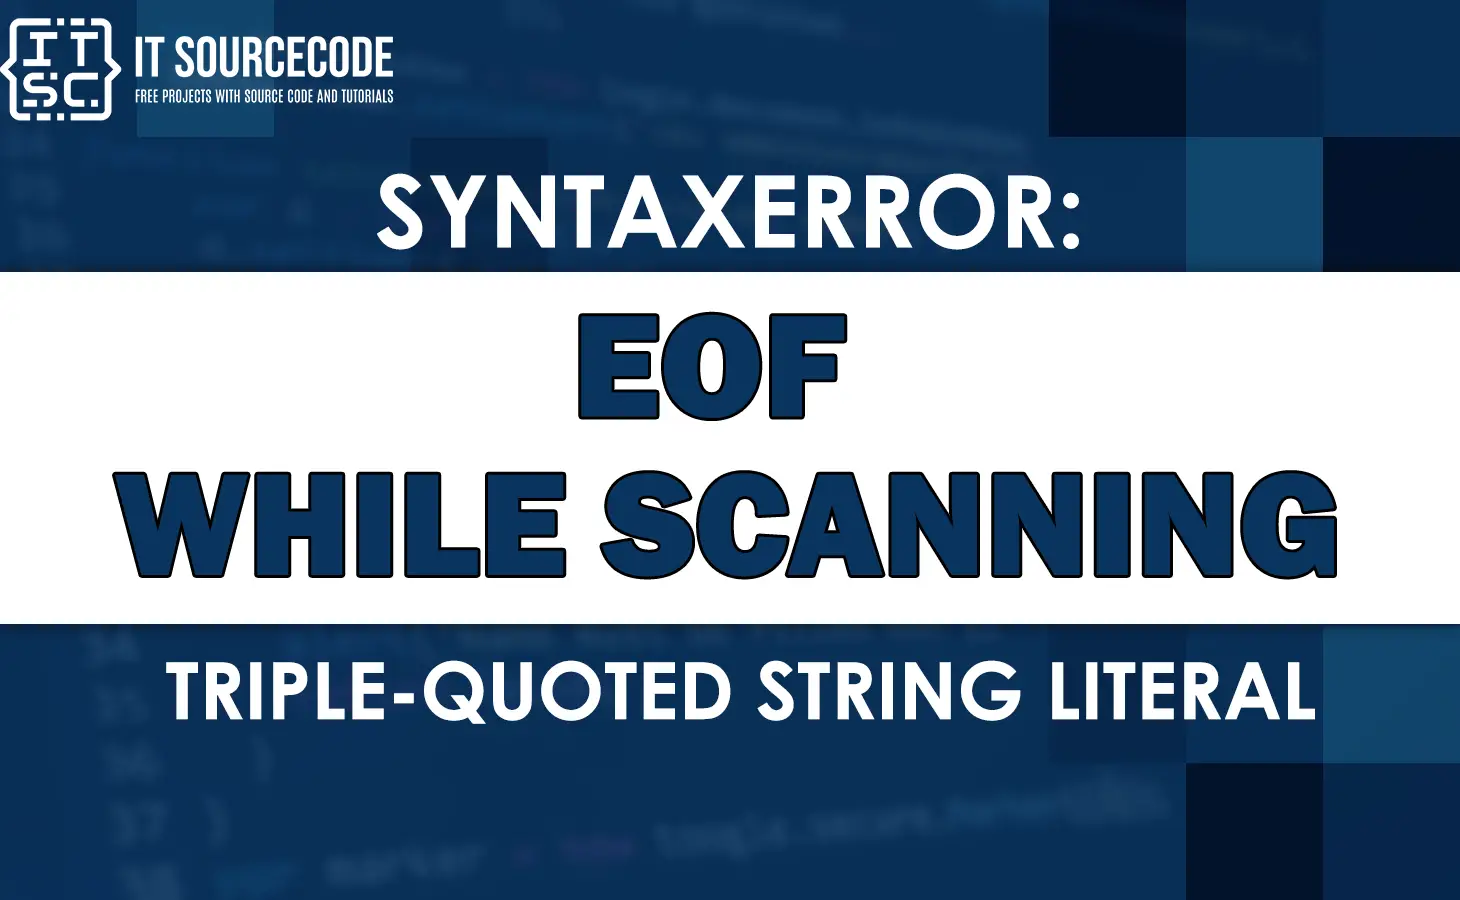 Syntaxerror eof while scanning triple-quoted string literal